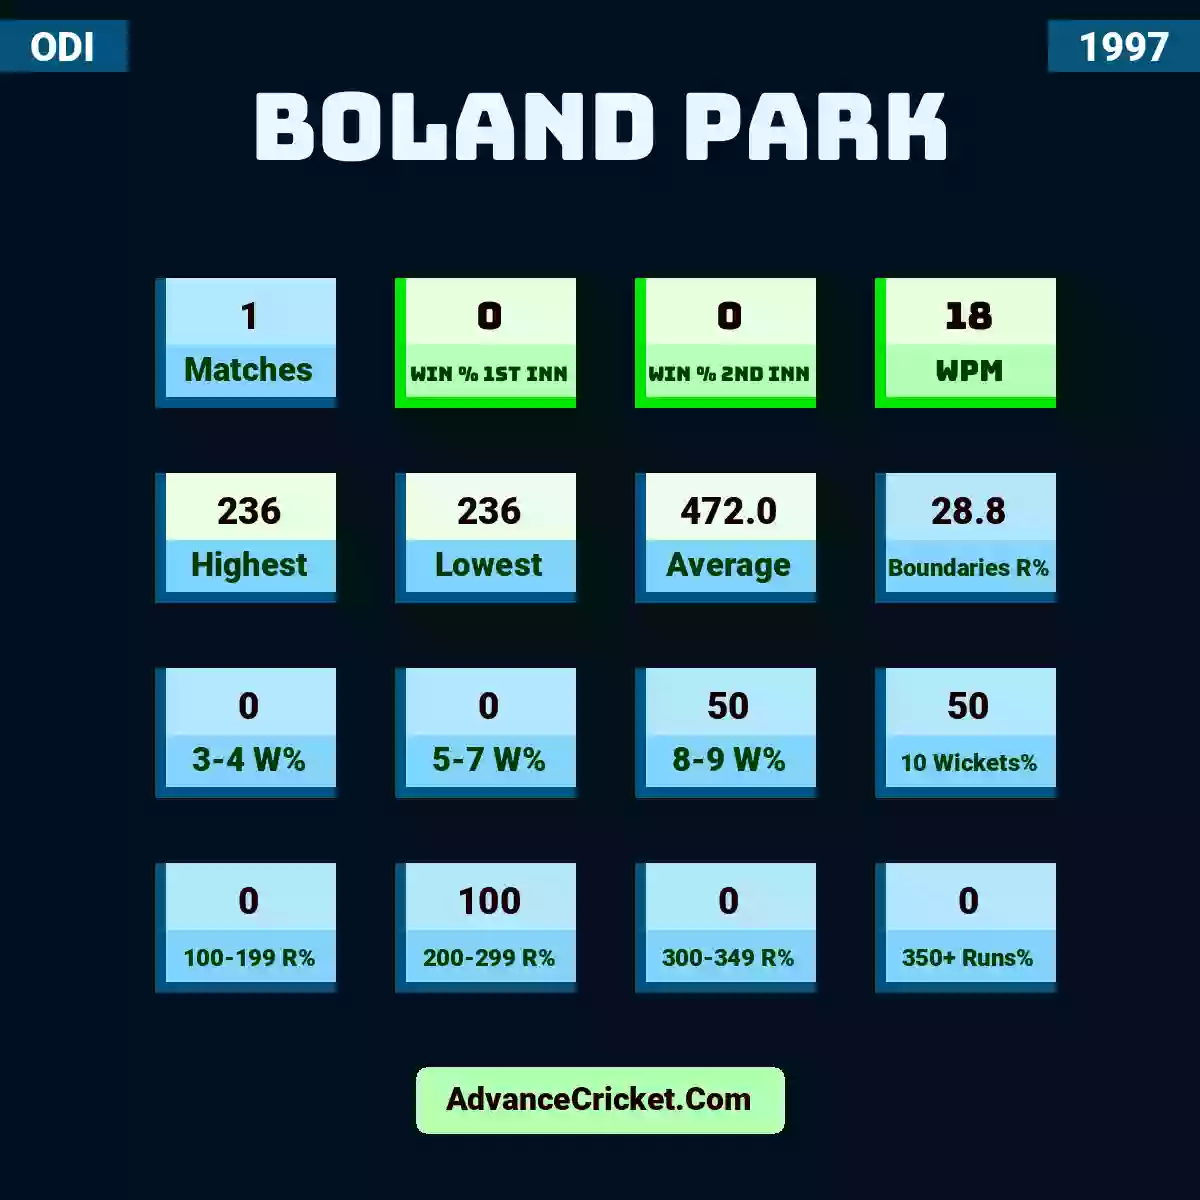 Image showing Boland Park with Matches: 1, Win % 1st Inn: 0, Win % 2nd Inn: 0, WPM: 18, Highest: 236, Lowest: 236, Average: 472.0, Boundaries R%: 28.8, 3-4 W%: 0, 5-7 W%: 0, 8-9 W%: 50, 10 Wickets%: 50, 100-199 R%: 0, 200-299 R%: 100, 300-349 R%: 0, 350+ Runs%: 0.